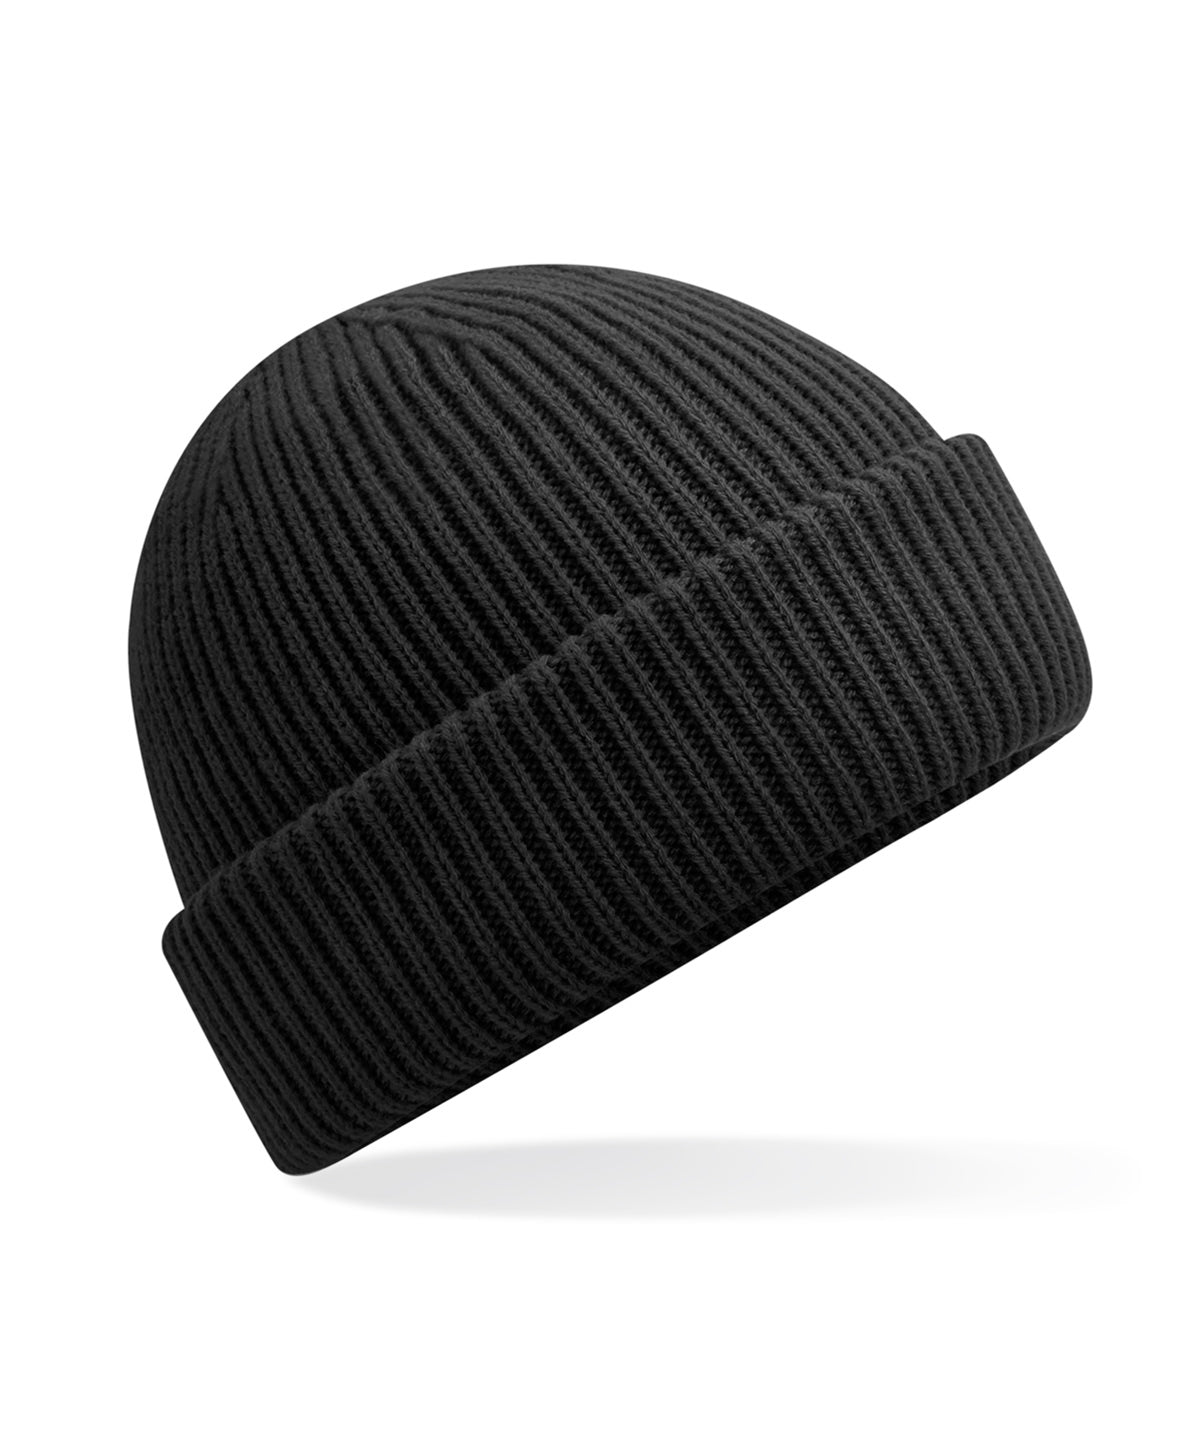 Personalised Hats - Black Beechfield Wind-resistant breathable elements beanie